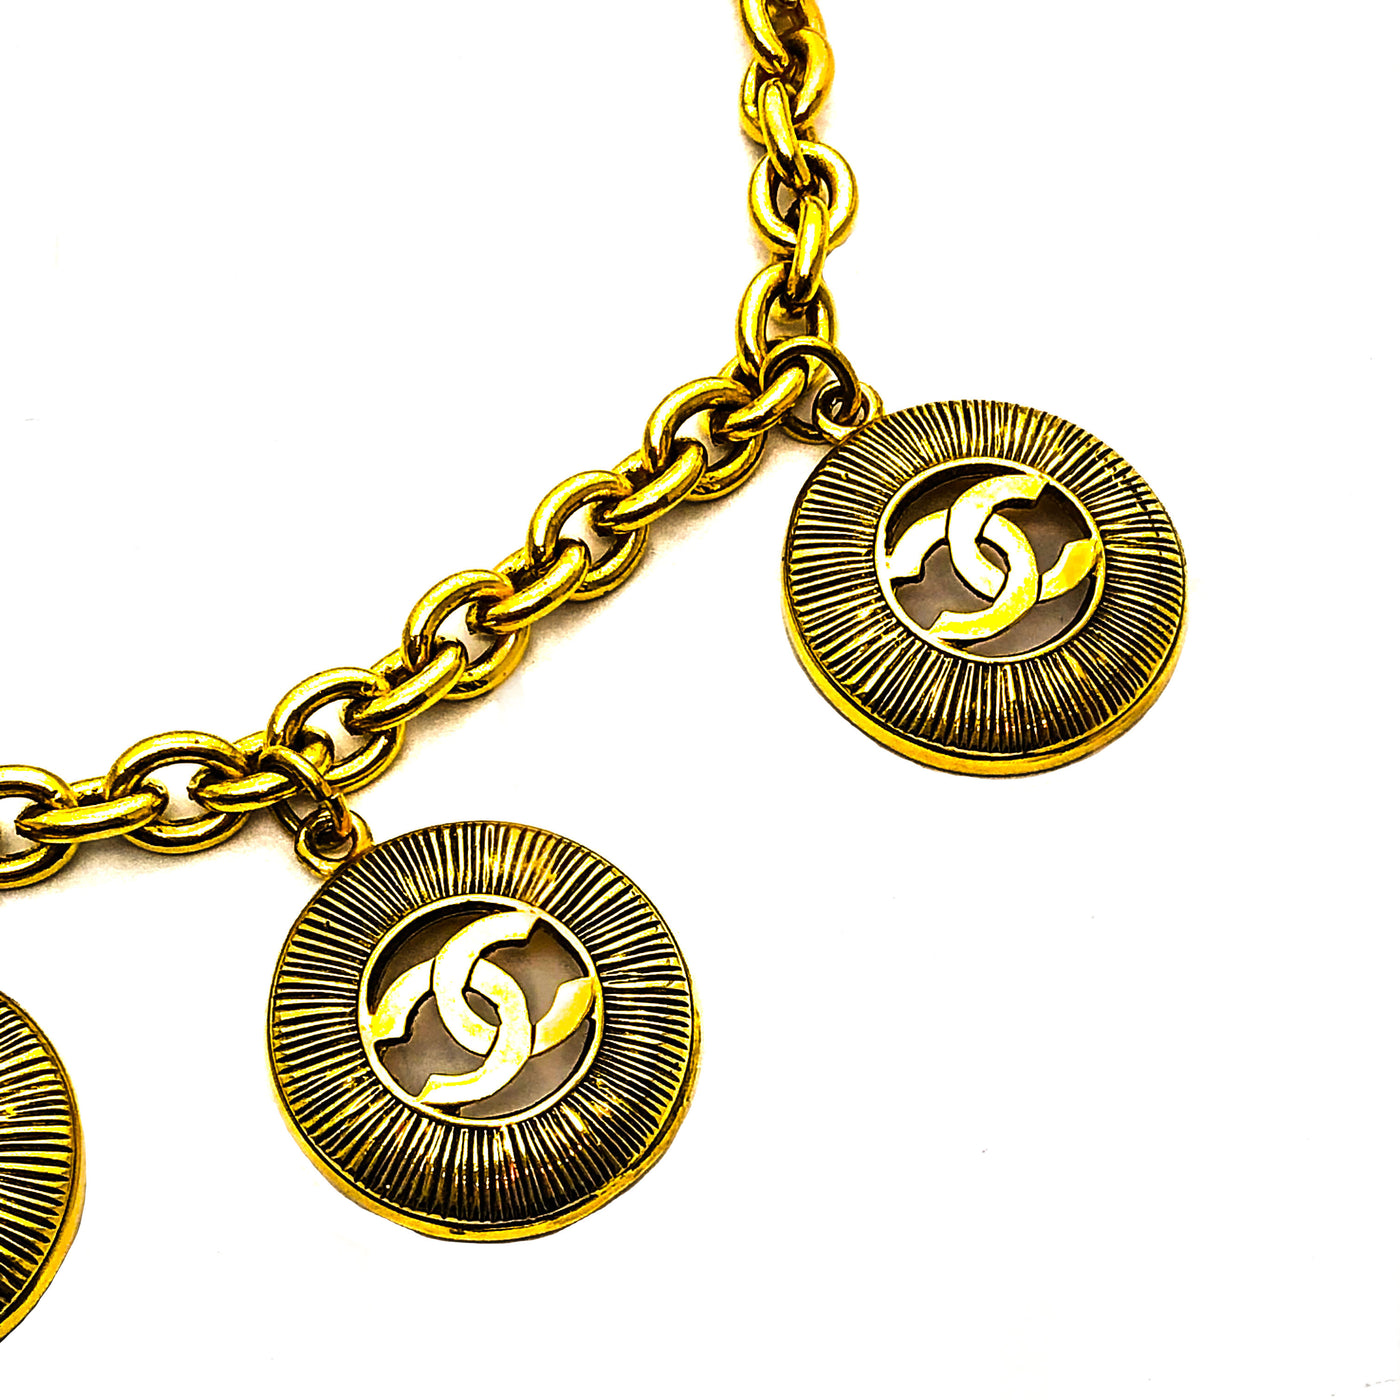 Chanel Vintage Rare Gold Classic Round Five Logo Necklace